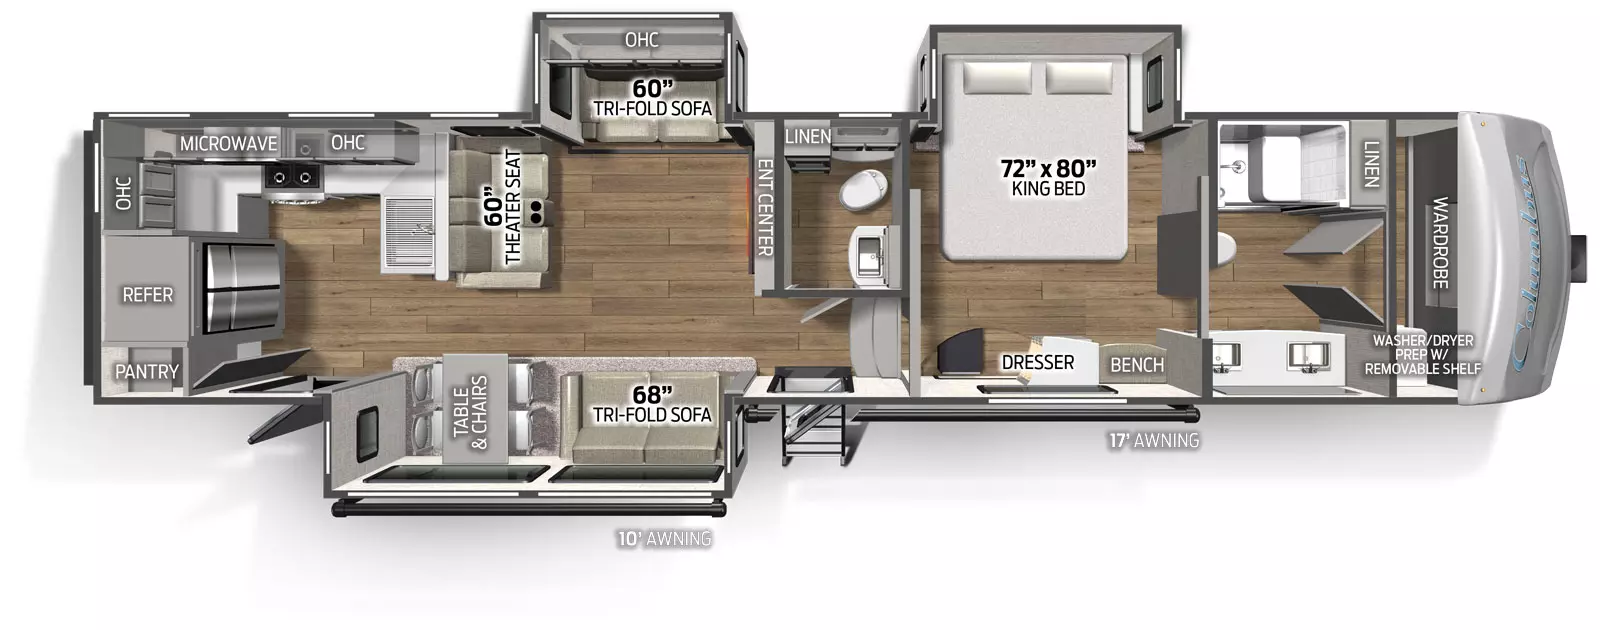 The 384RK has 3 slide outs, 2 on the road side and one on the camp side, along with two entry doors on the camp side. Interior layout from front to back: front bathroom with walk in closet and two sinks and cabinets, bedroom with king size bed in the road side slide out, half bath, living area with the road side slide out theater seating; TV entertainment area, The camp side slide out containing freestanding table and chairs; Rear Kitchen containing residential refrigerator, cooktop with oven and overhead microwave.
